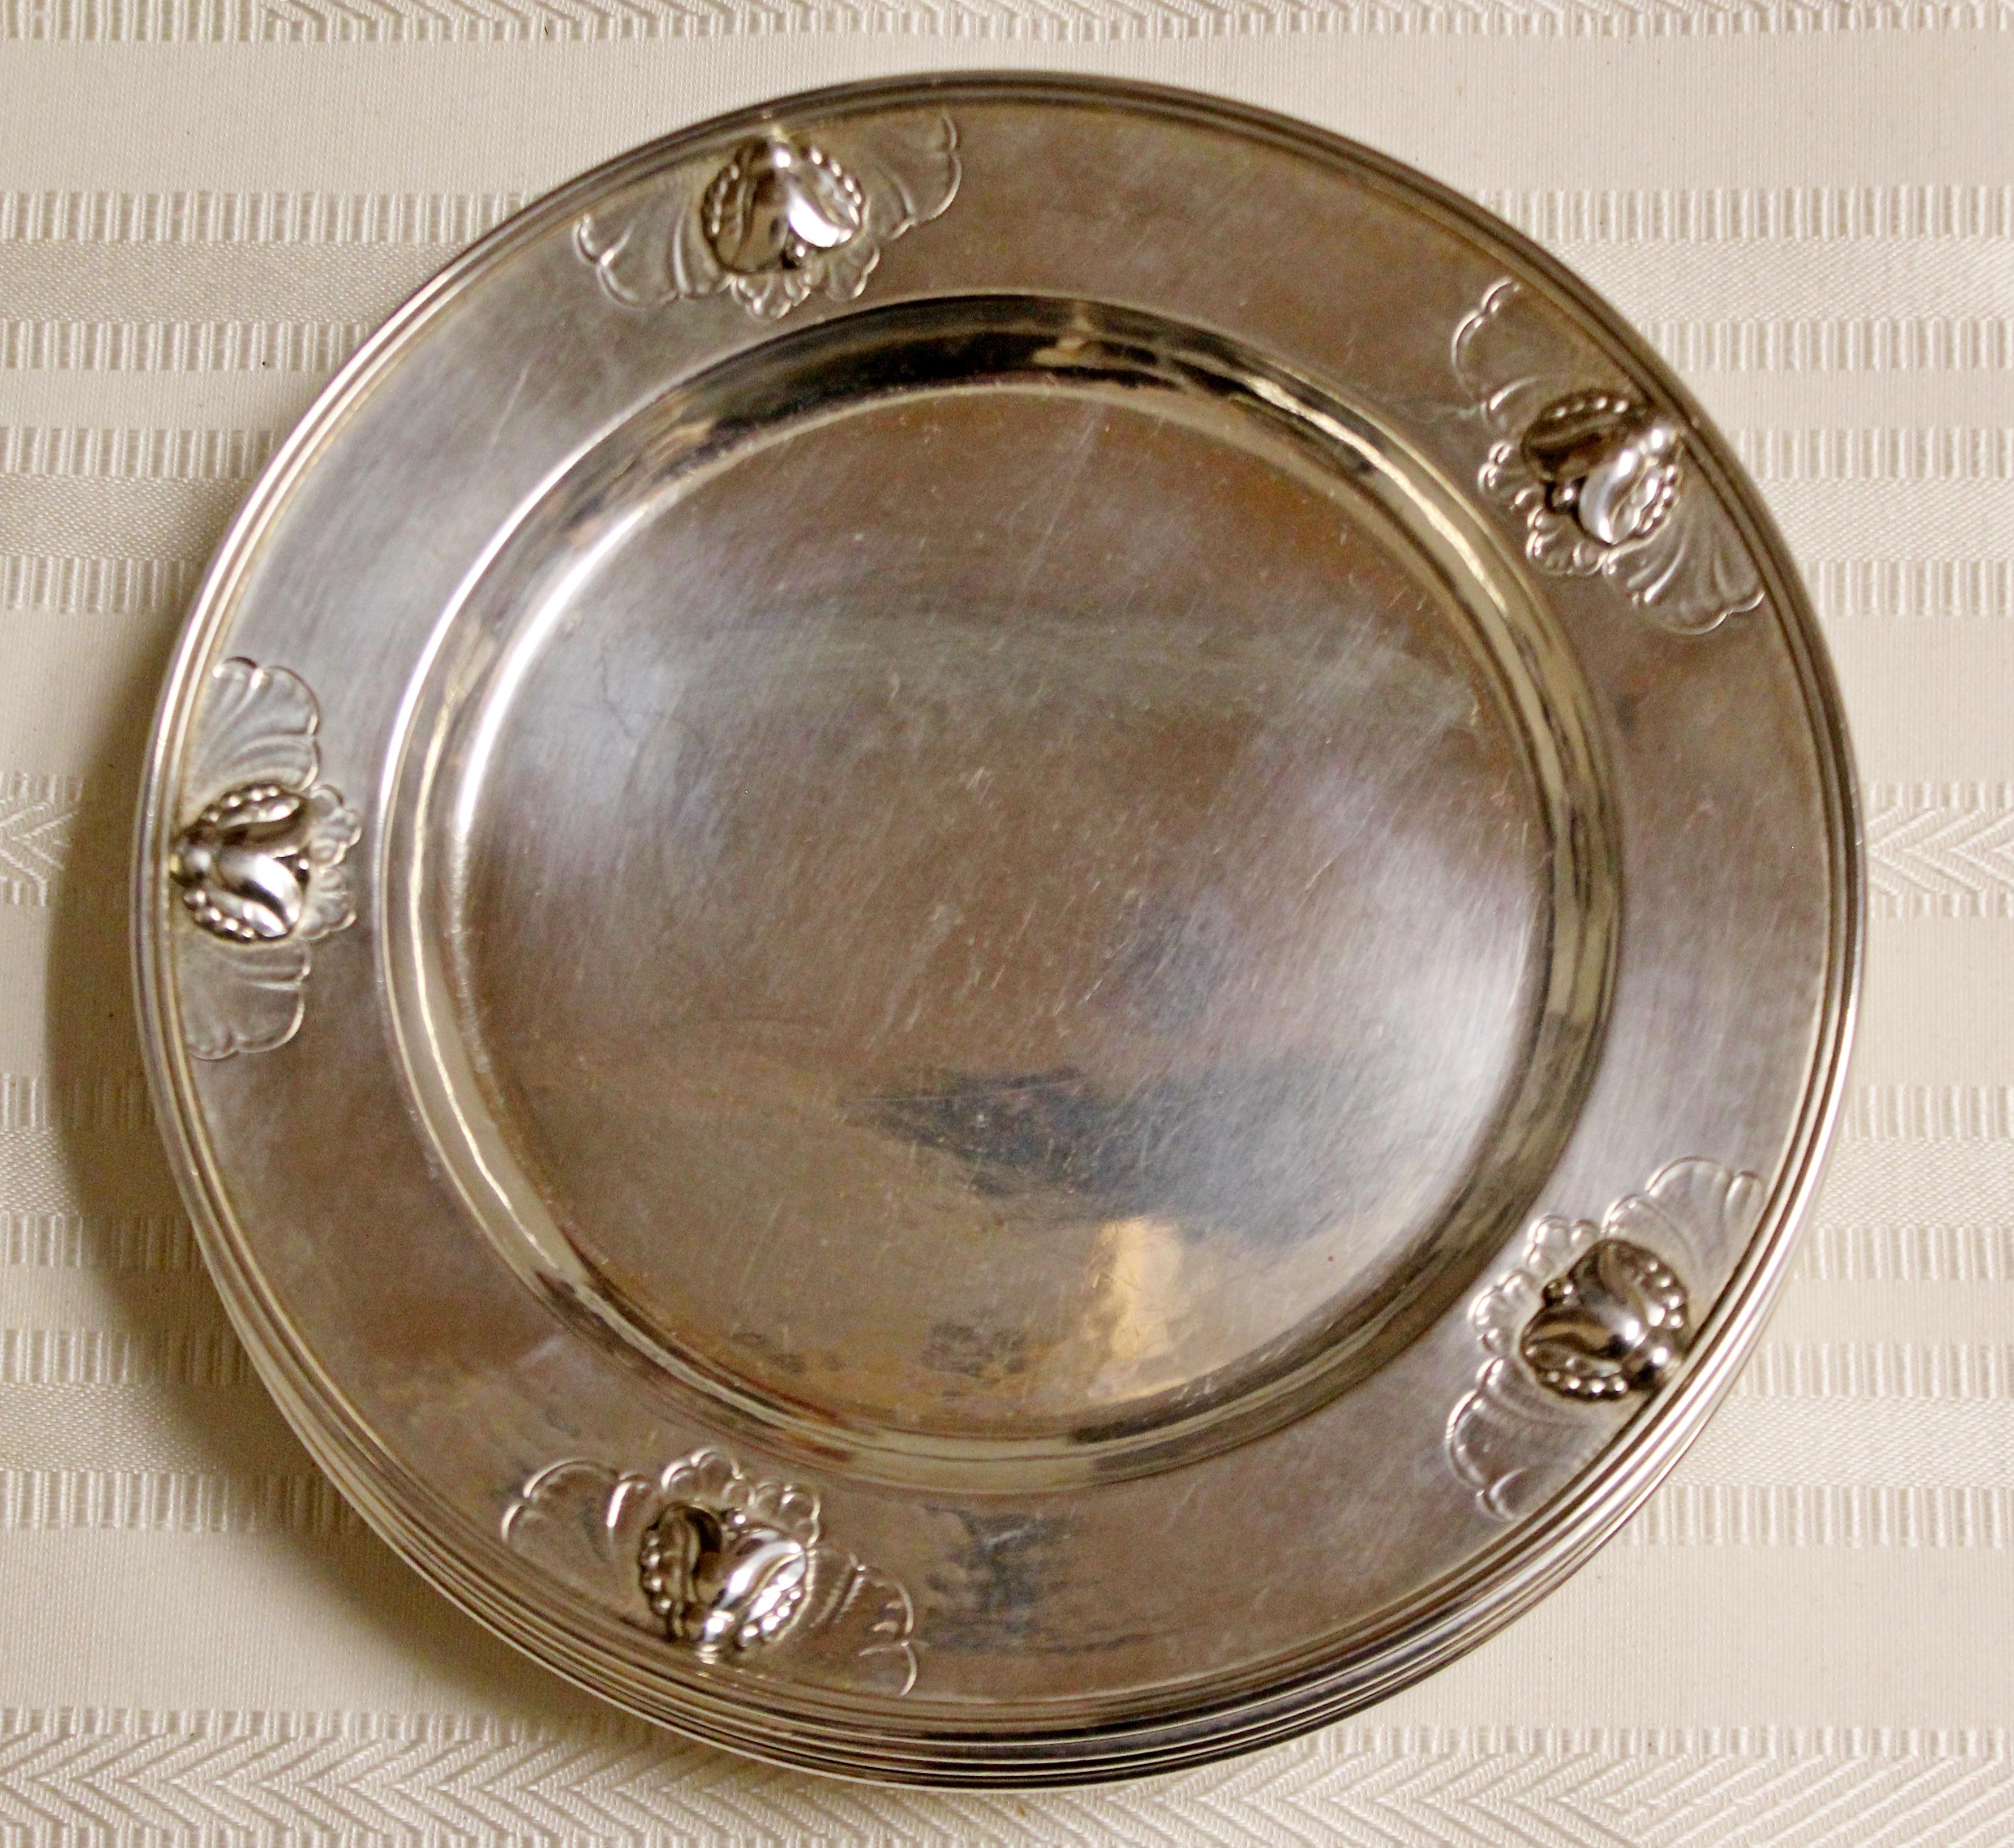 For your consideration is a spectacular, sterling silver, set of eight, blossom pattern, Georg Jensen plates, made in Denmark, circa 1940s. In excellent condition. The dimensions of each are 6